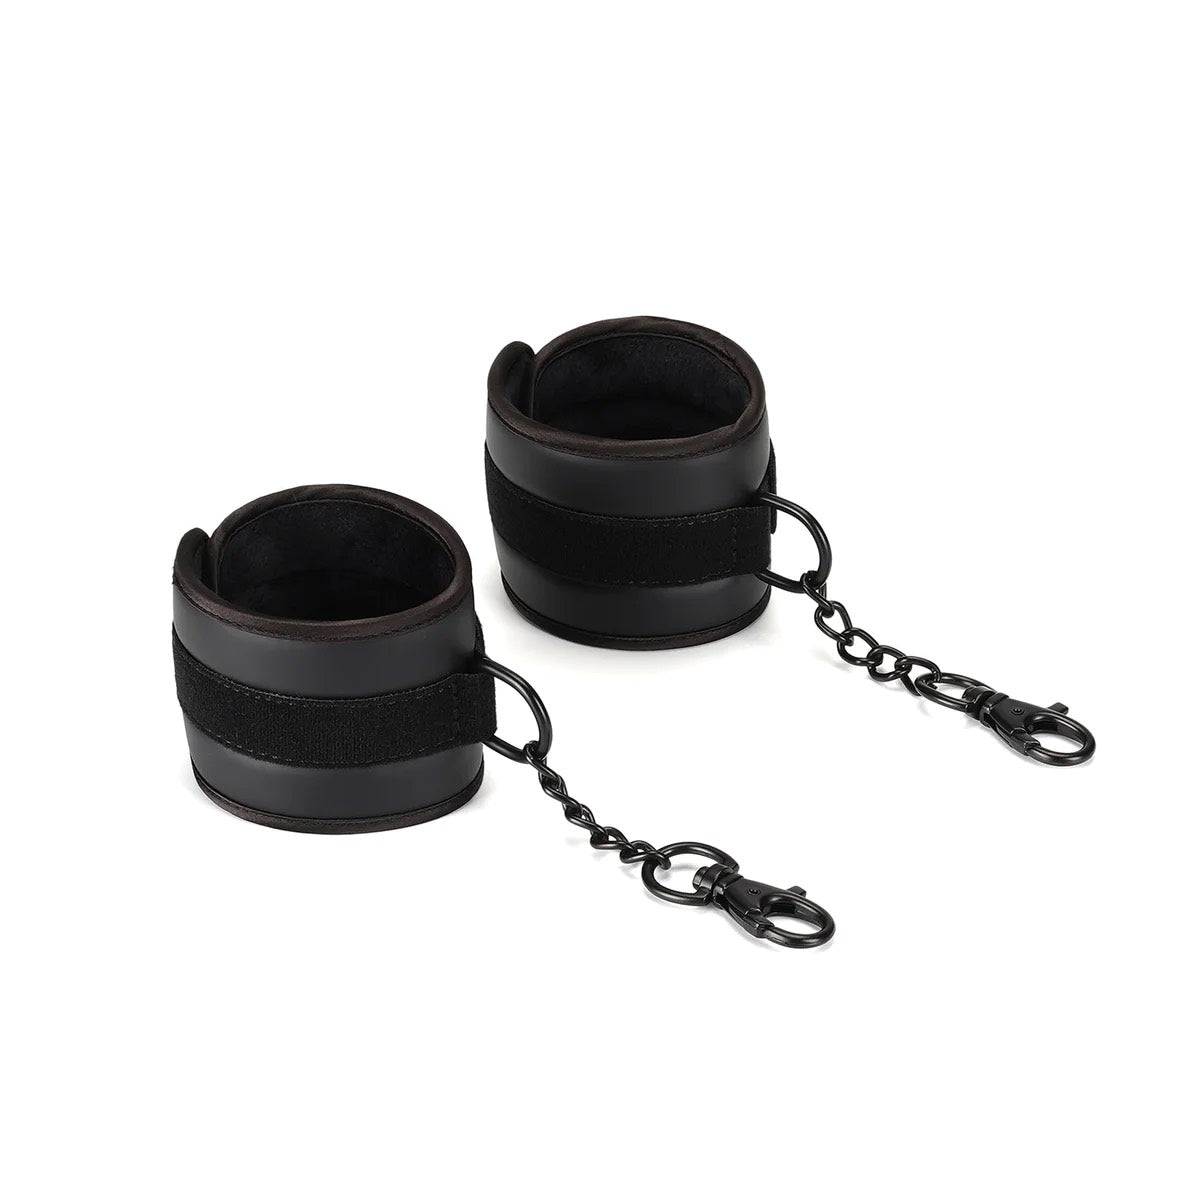 The cuffs and attached chains with clips from the Vegan Fetish Black Neoprene Wrist Collar Restraint Set.